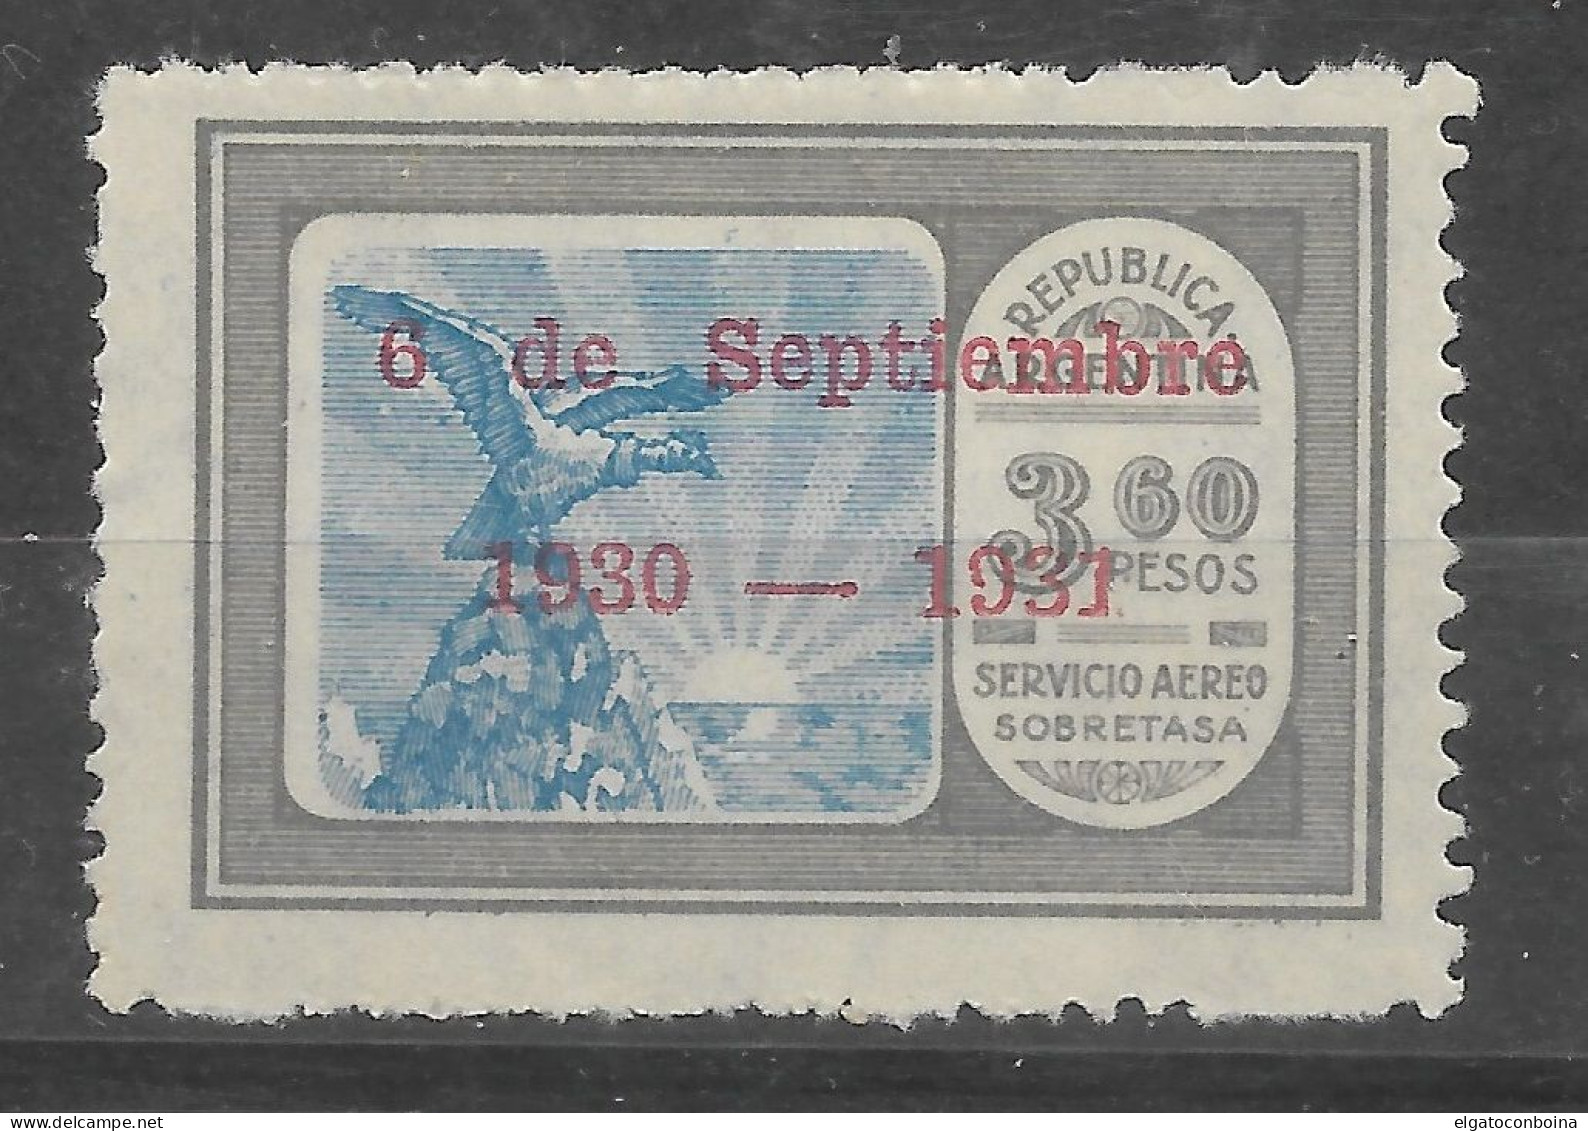 ARGENTINA 1931 EAGLE MOUNTAIN AIRMAIL OVERPRINTED STAMP C34 MI 383 MNH - Unused Stamps